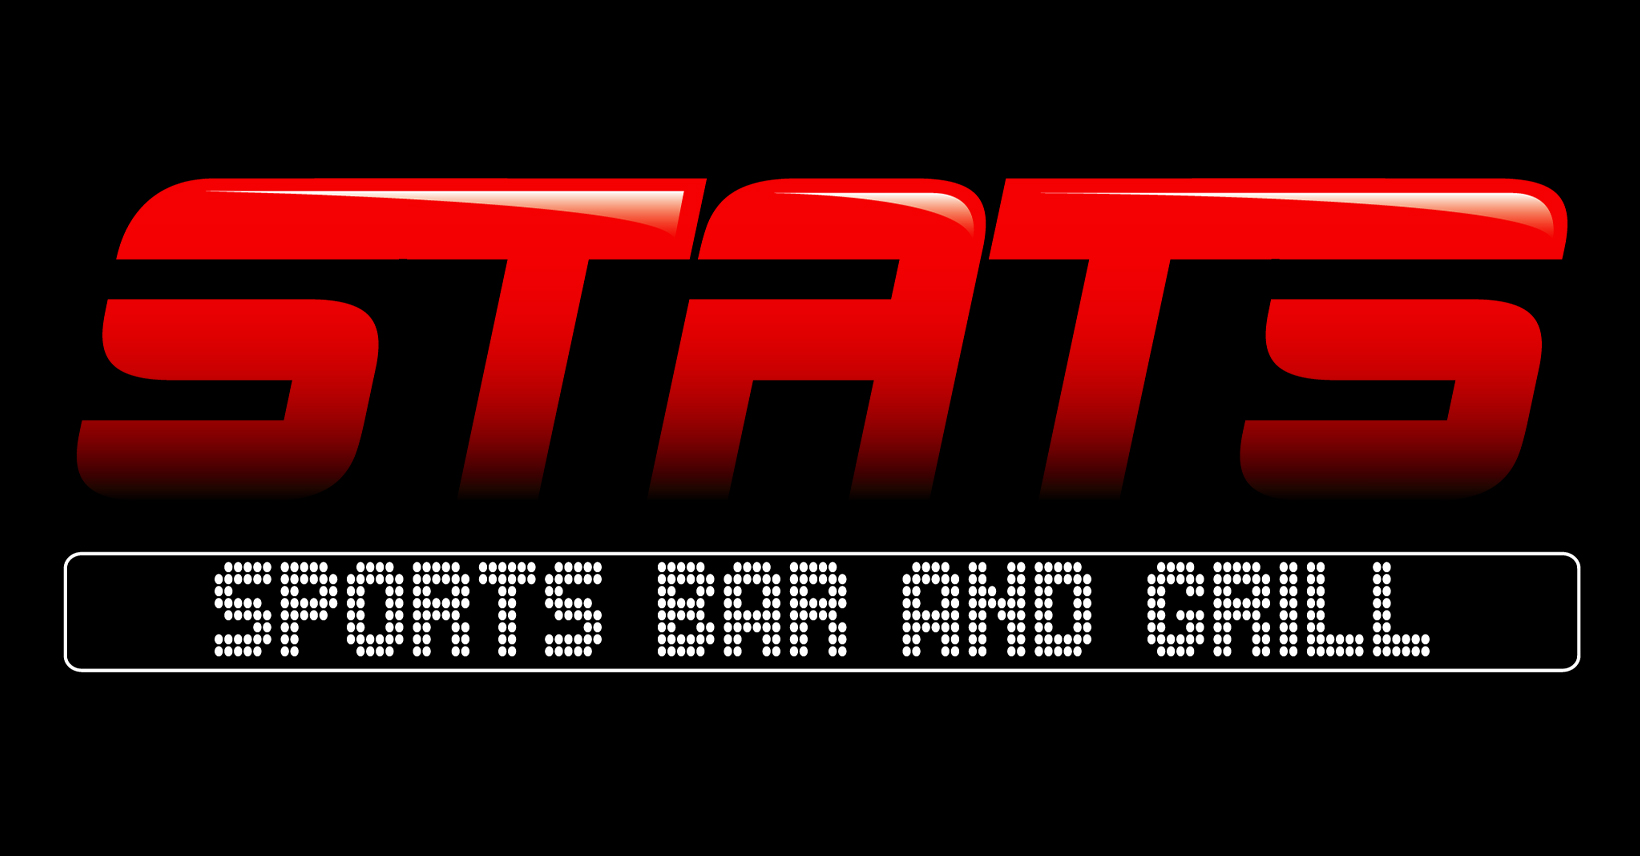 Stats Sports Bar and Grill